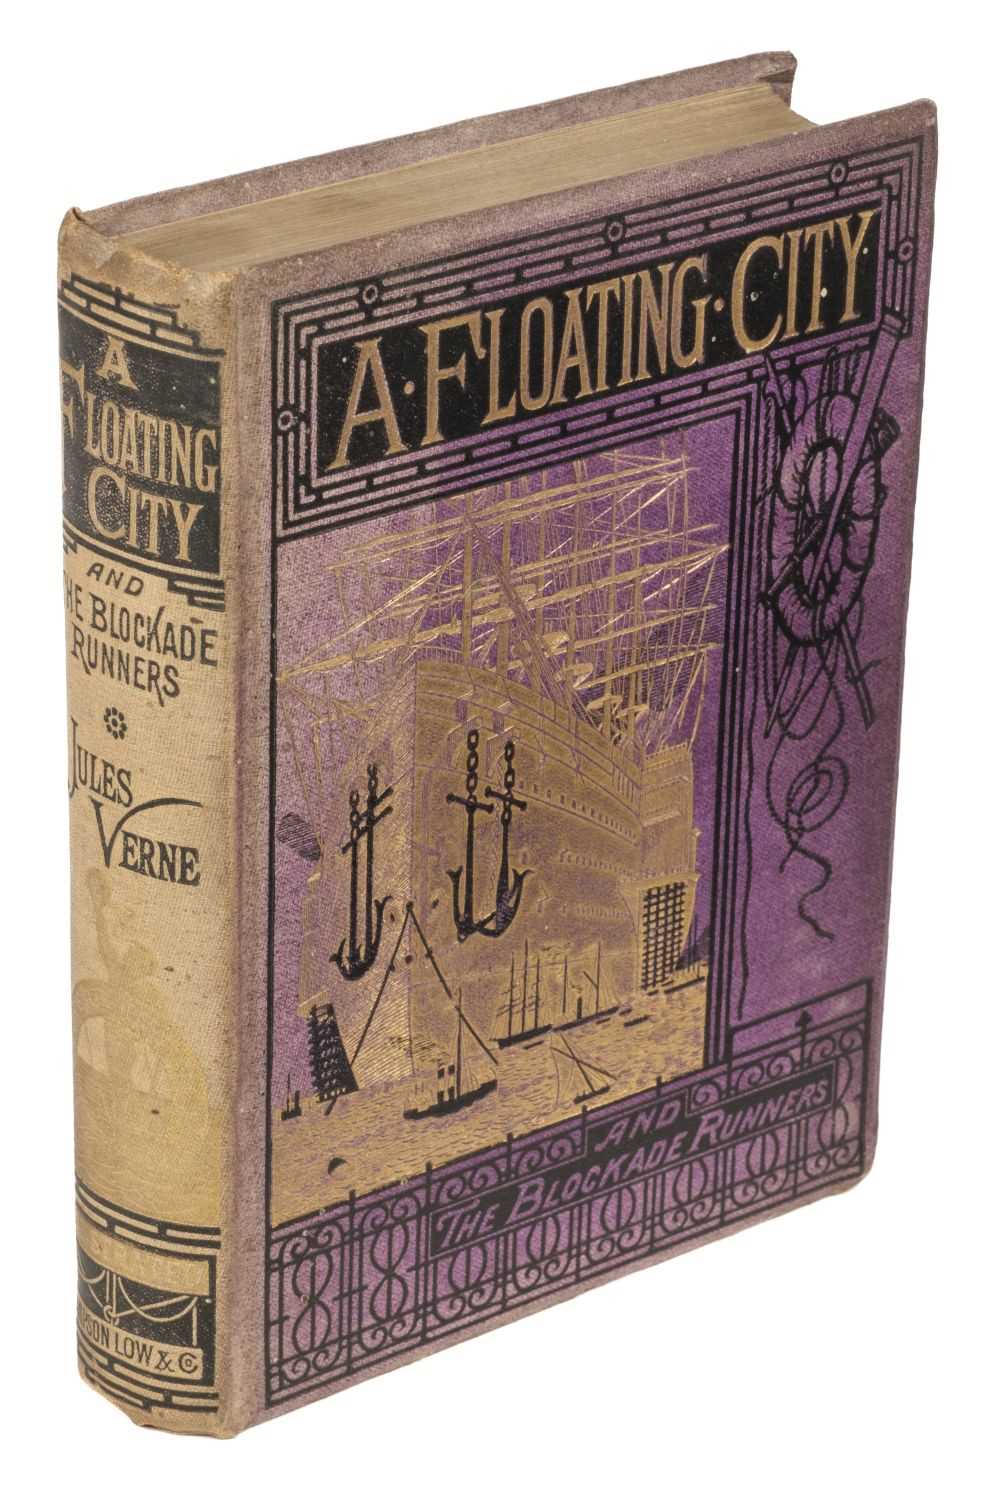 Lot 305 - Verne (Jules). A Floating City, and the Blockade Runners, 1st UK edition, London: Sampson Low, 1874